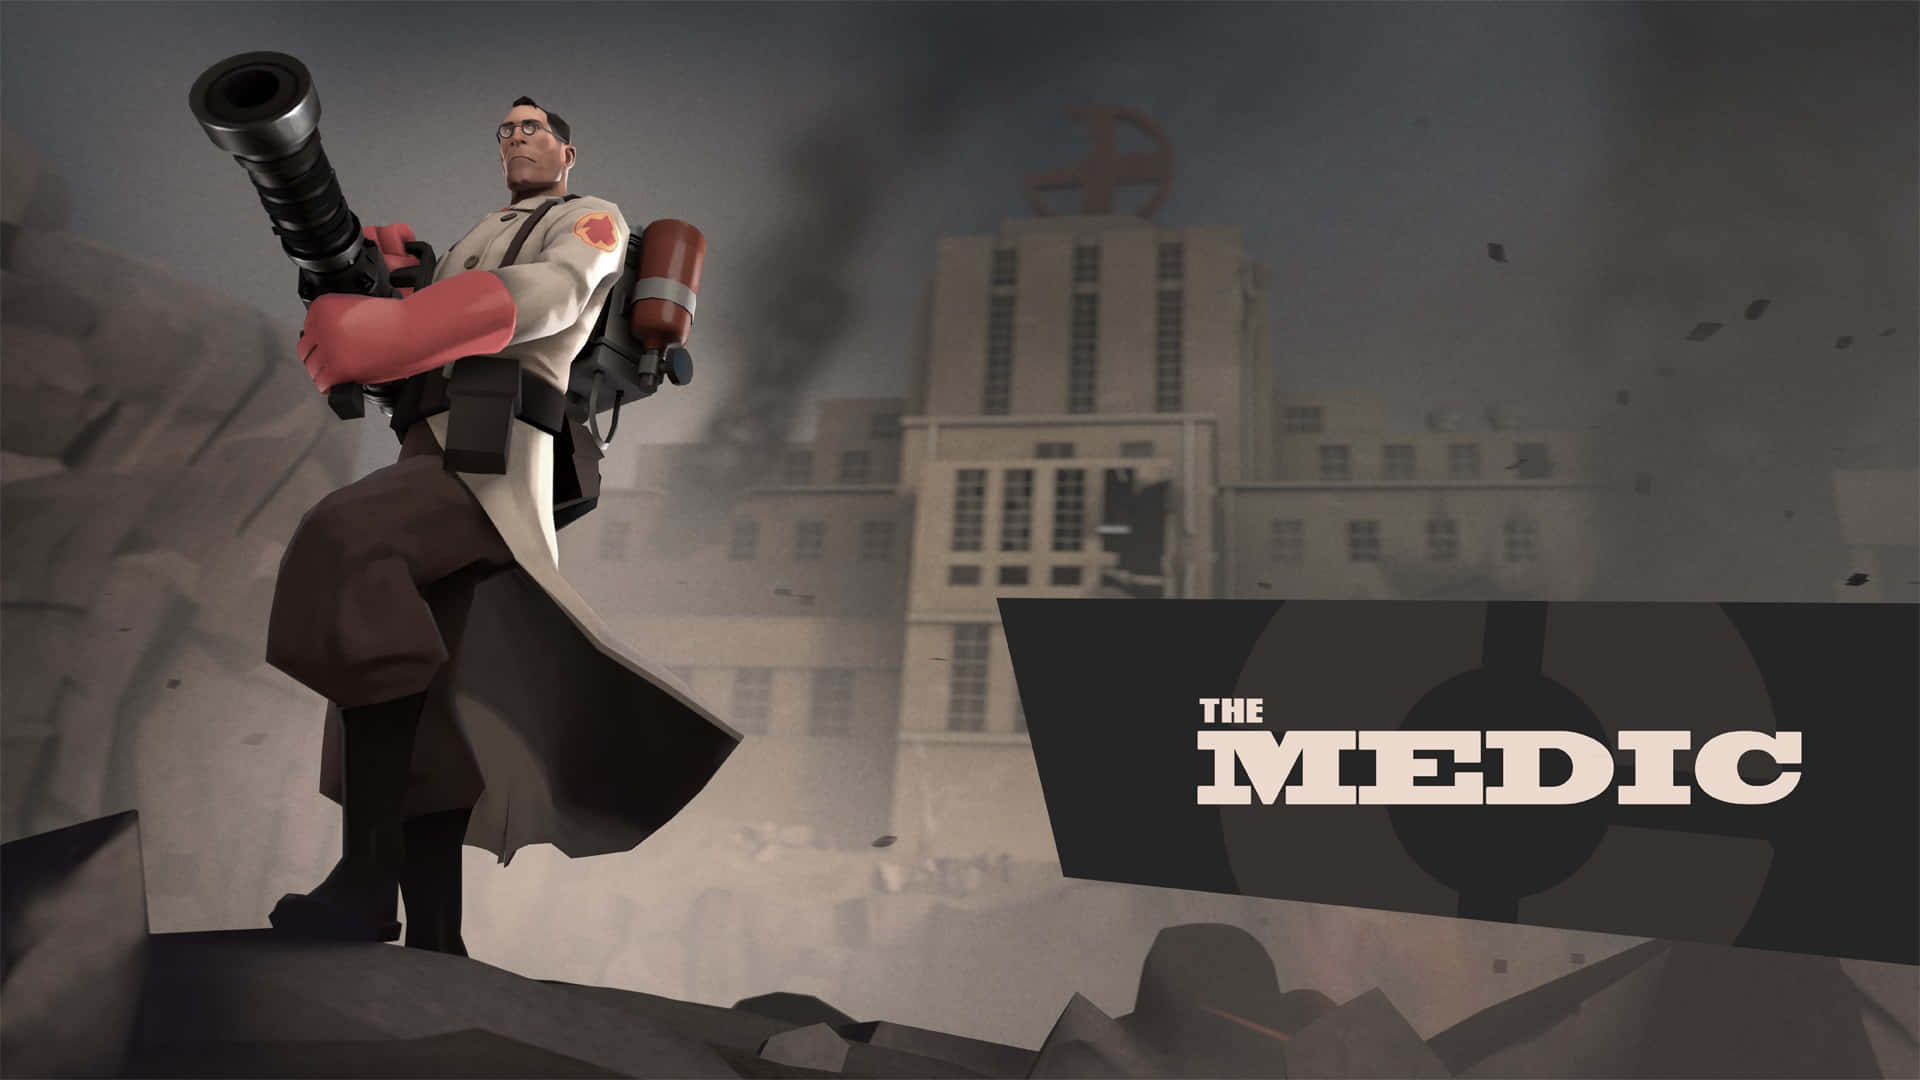 The Colorful Team Fortress 2 Characters in Action Wallpaper